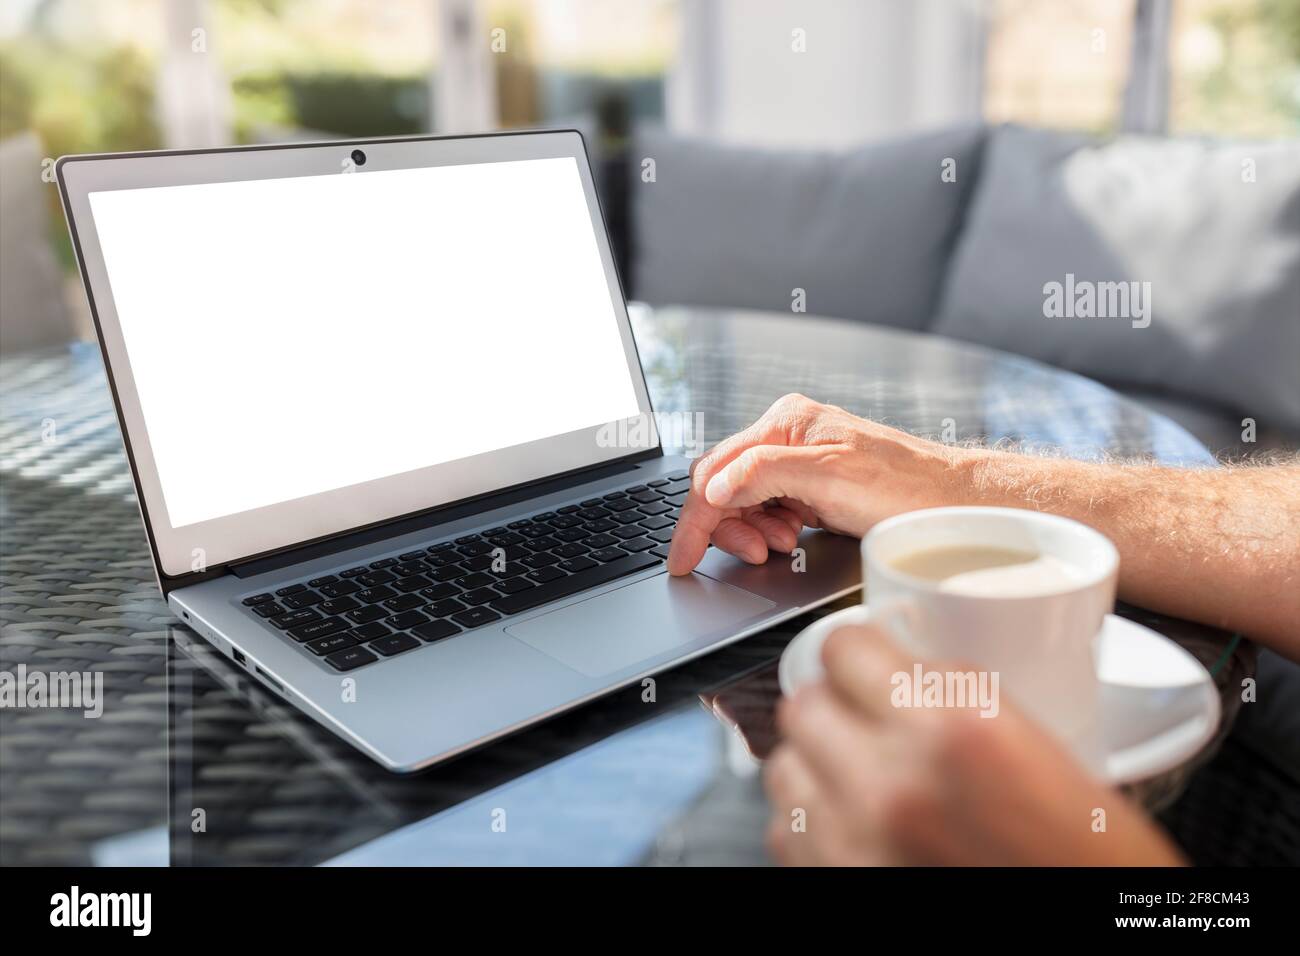 Man with laptop computer on desk working in cafe or office with blank screen Stock Photo